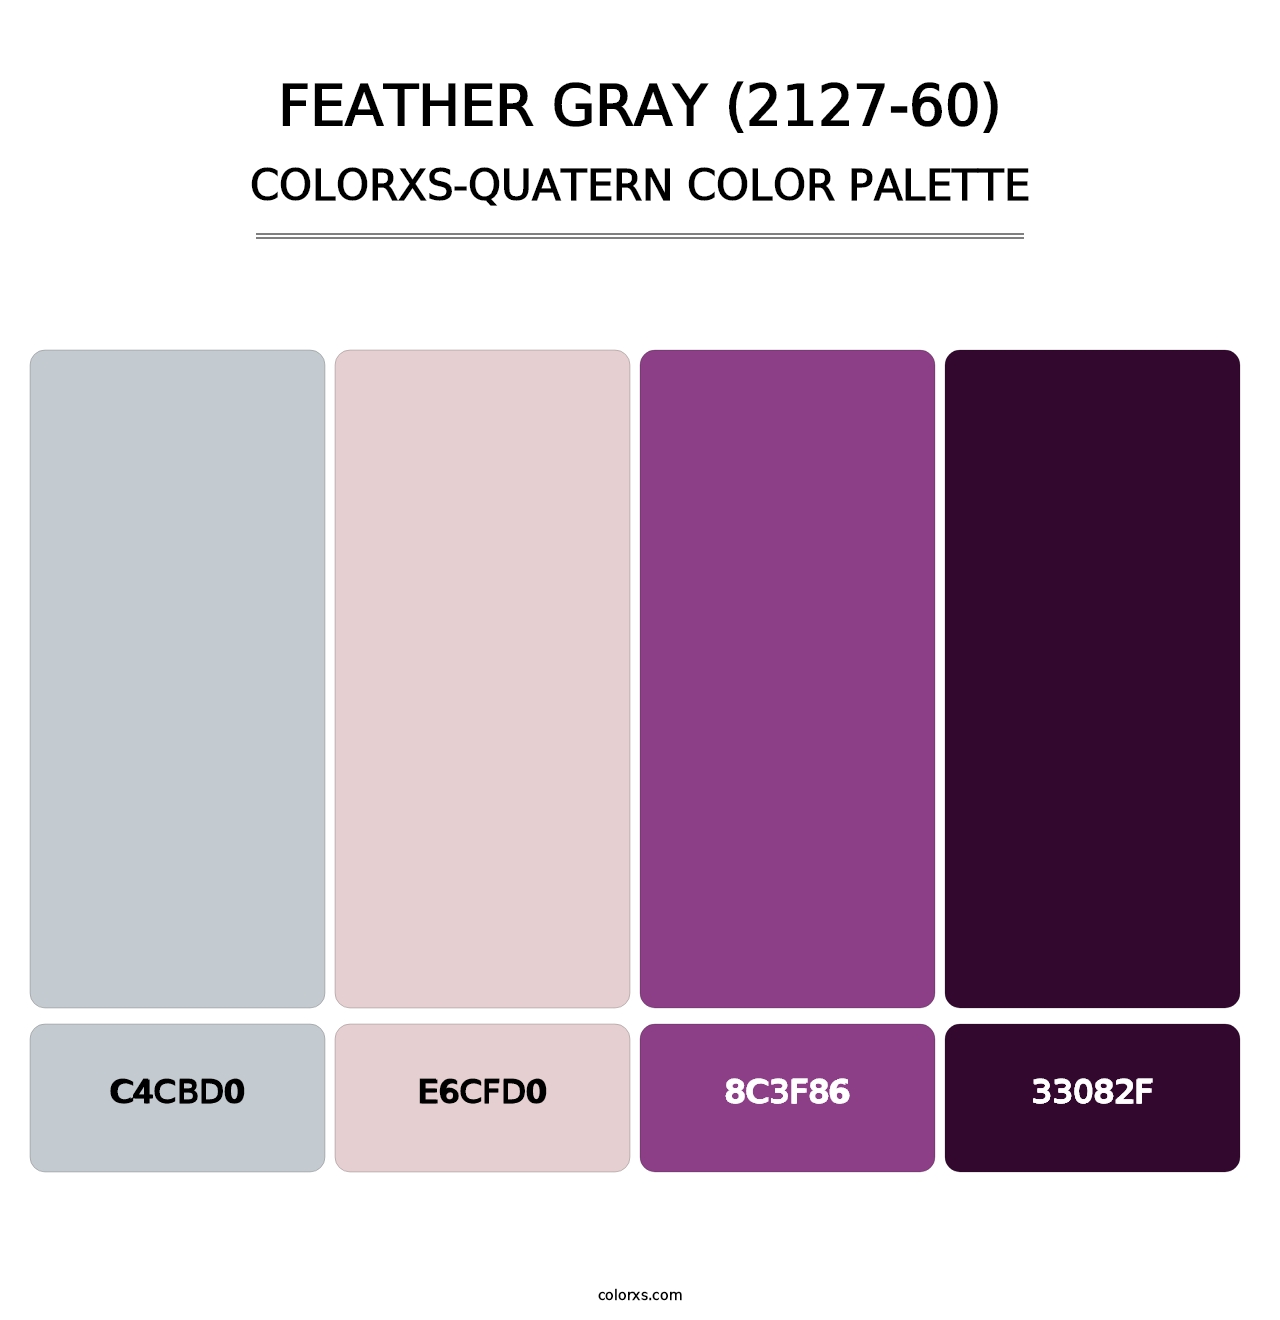 Feather Gray (2127-60) - Colorxs Quatern Palette